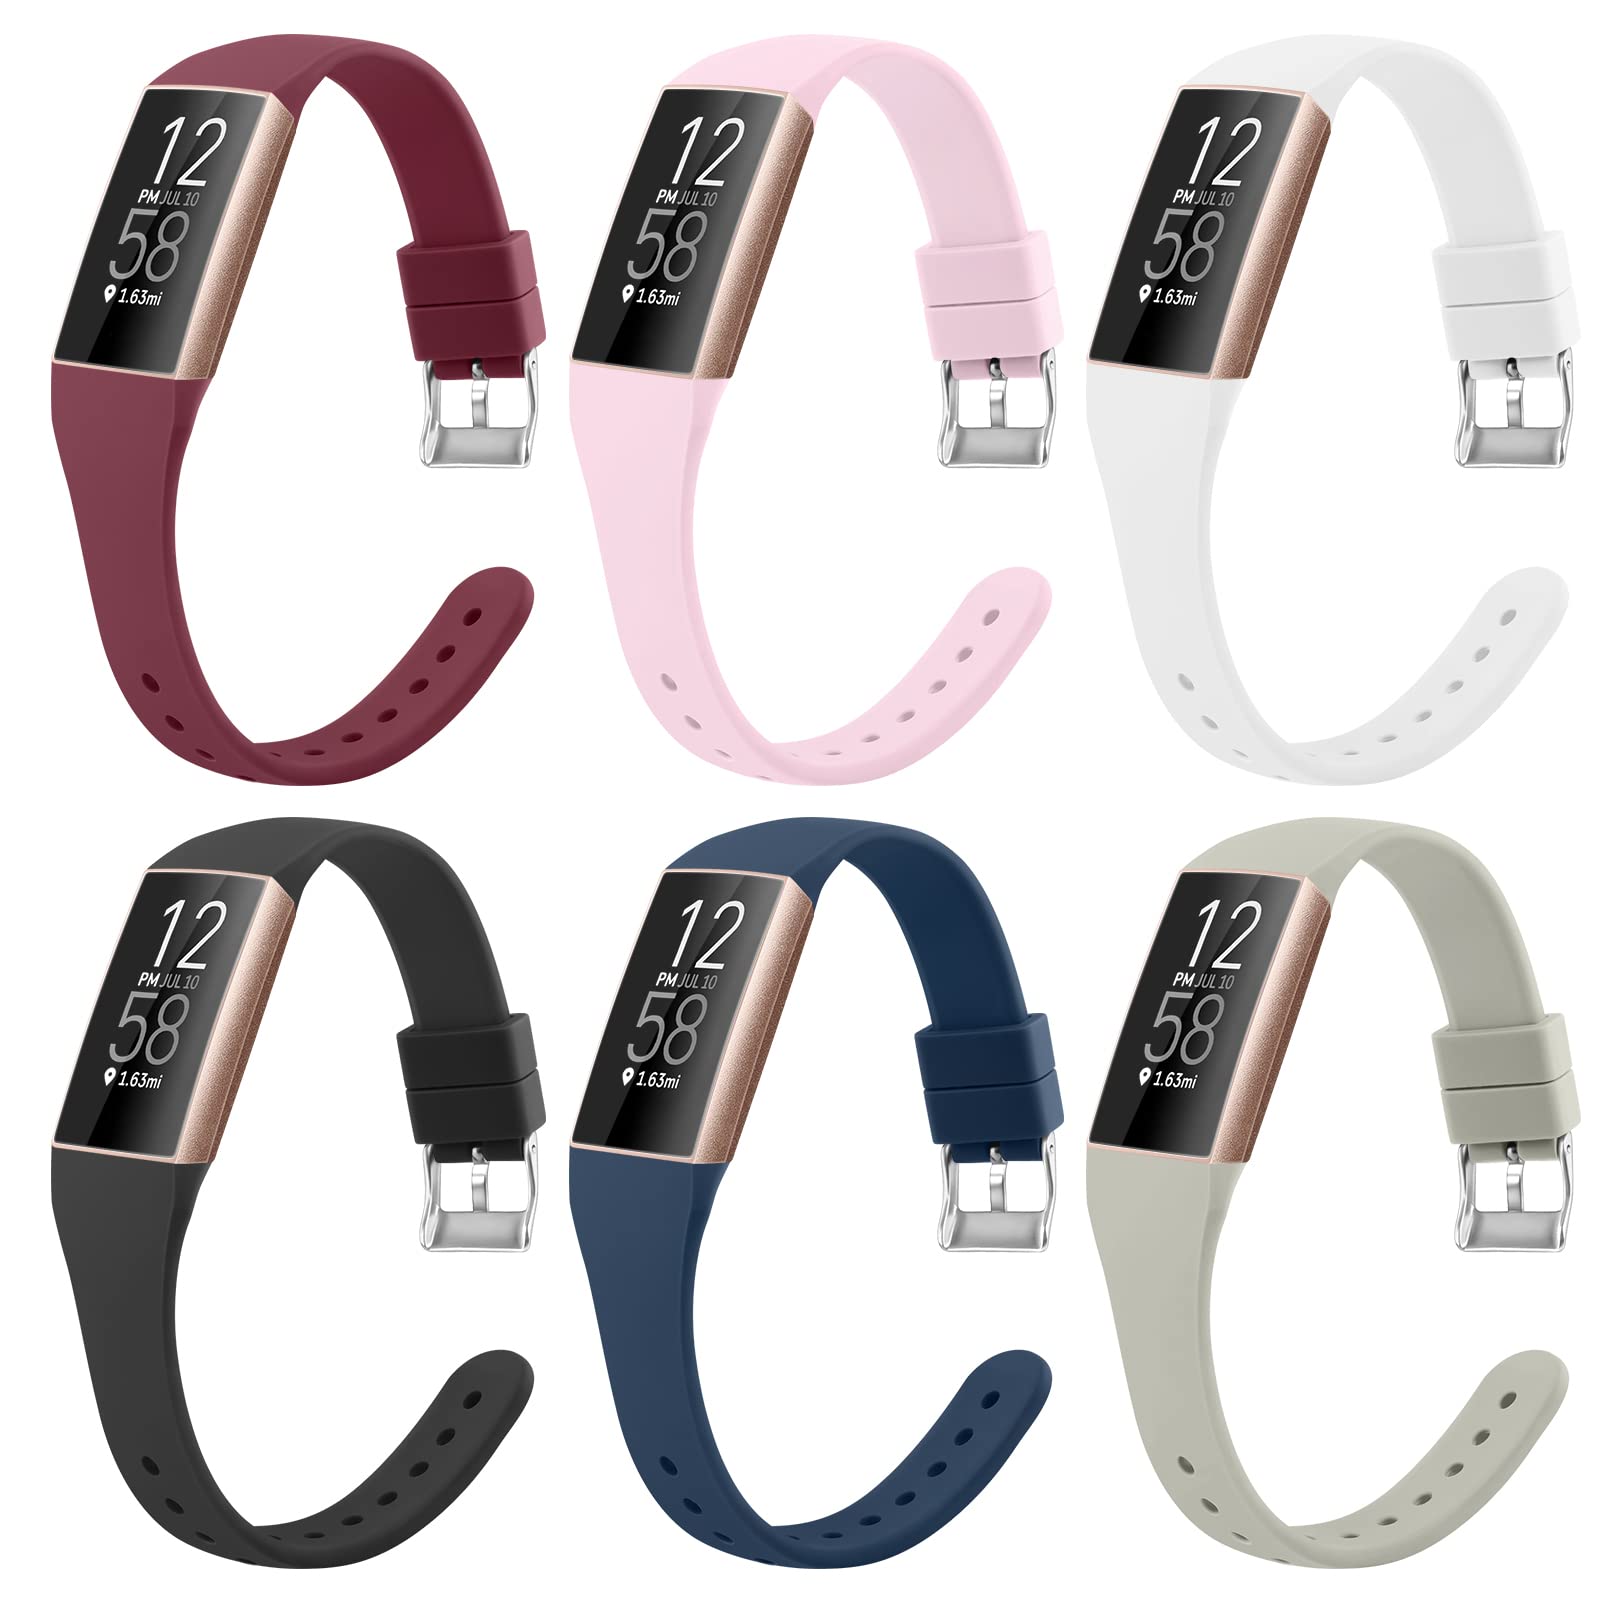 6 Pack Slim Soft Silicone Wristbands Compatible with Fitbit Charge